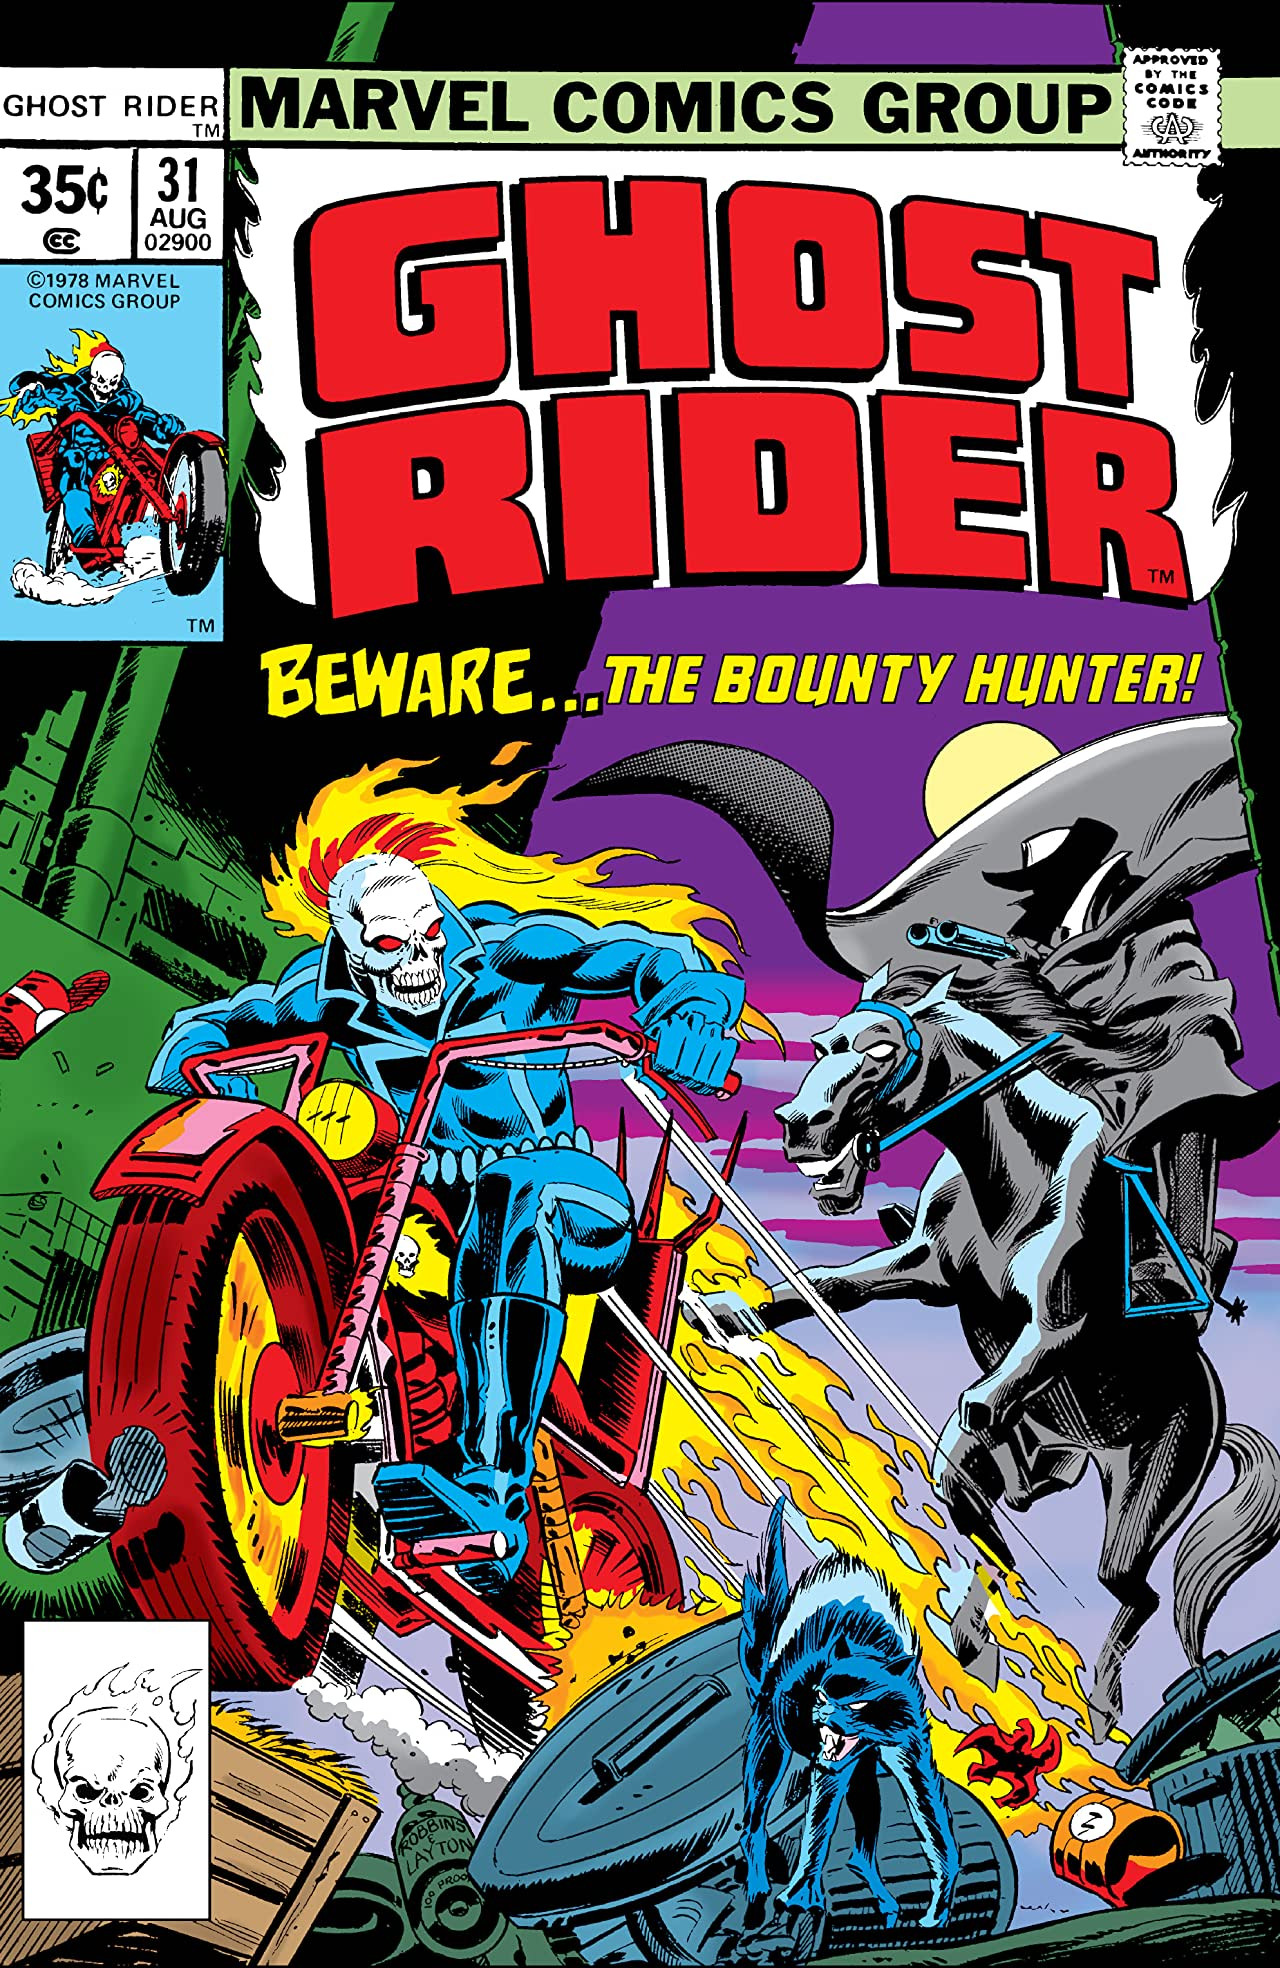 Ghost Rider Vol 2 31 | Marvel Database | Fandom powered by Wikia